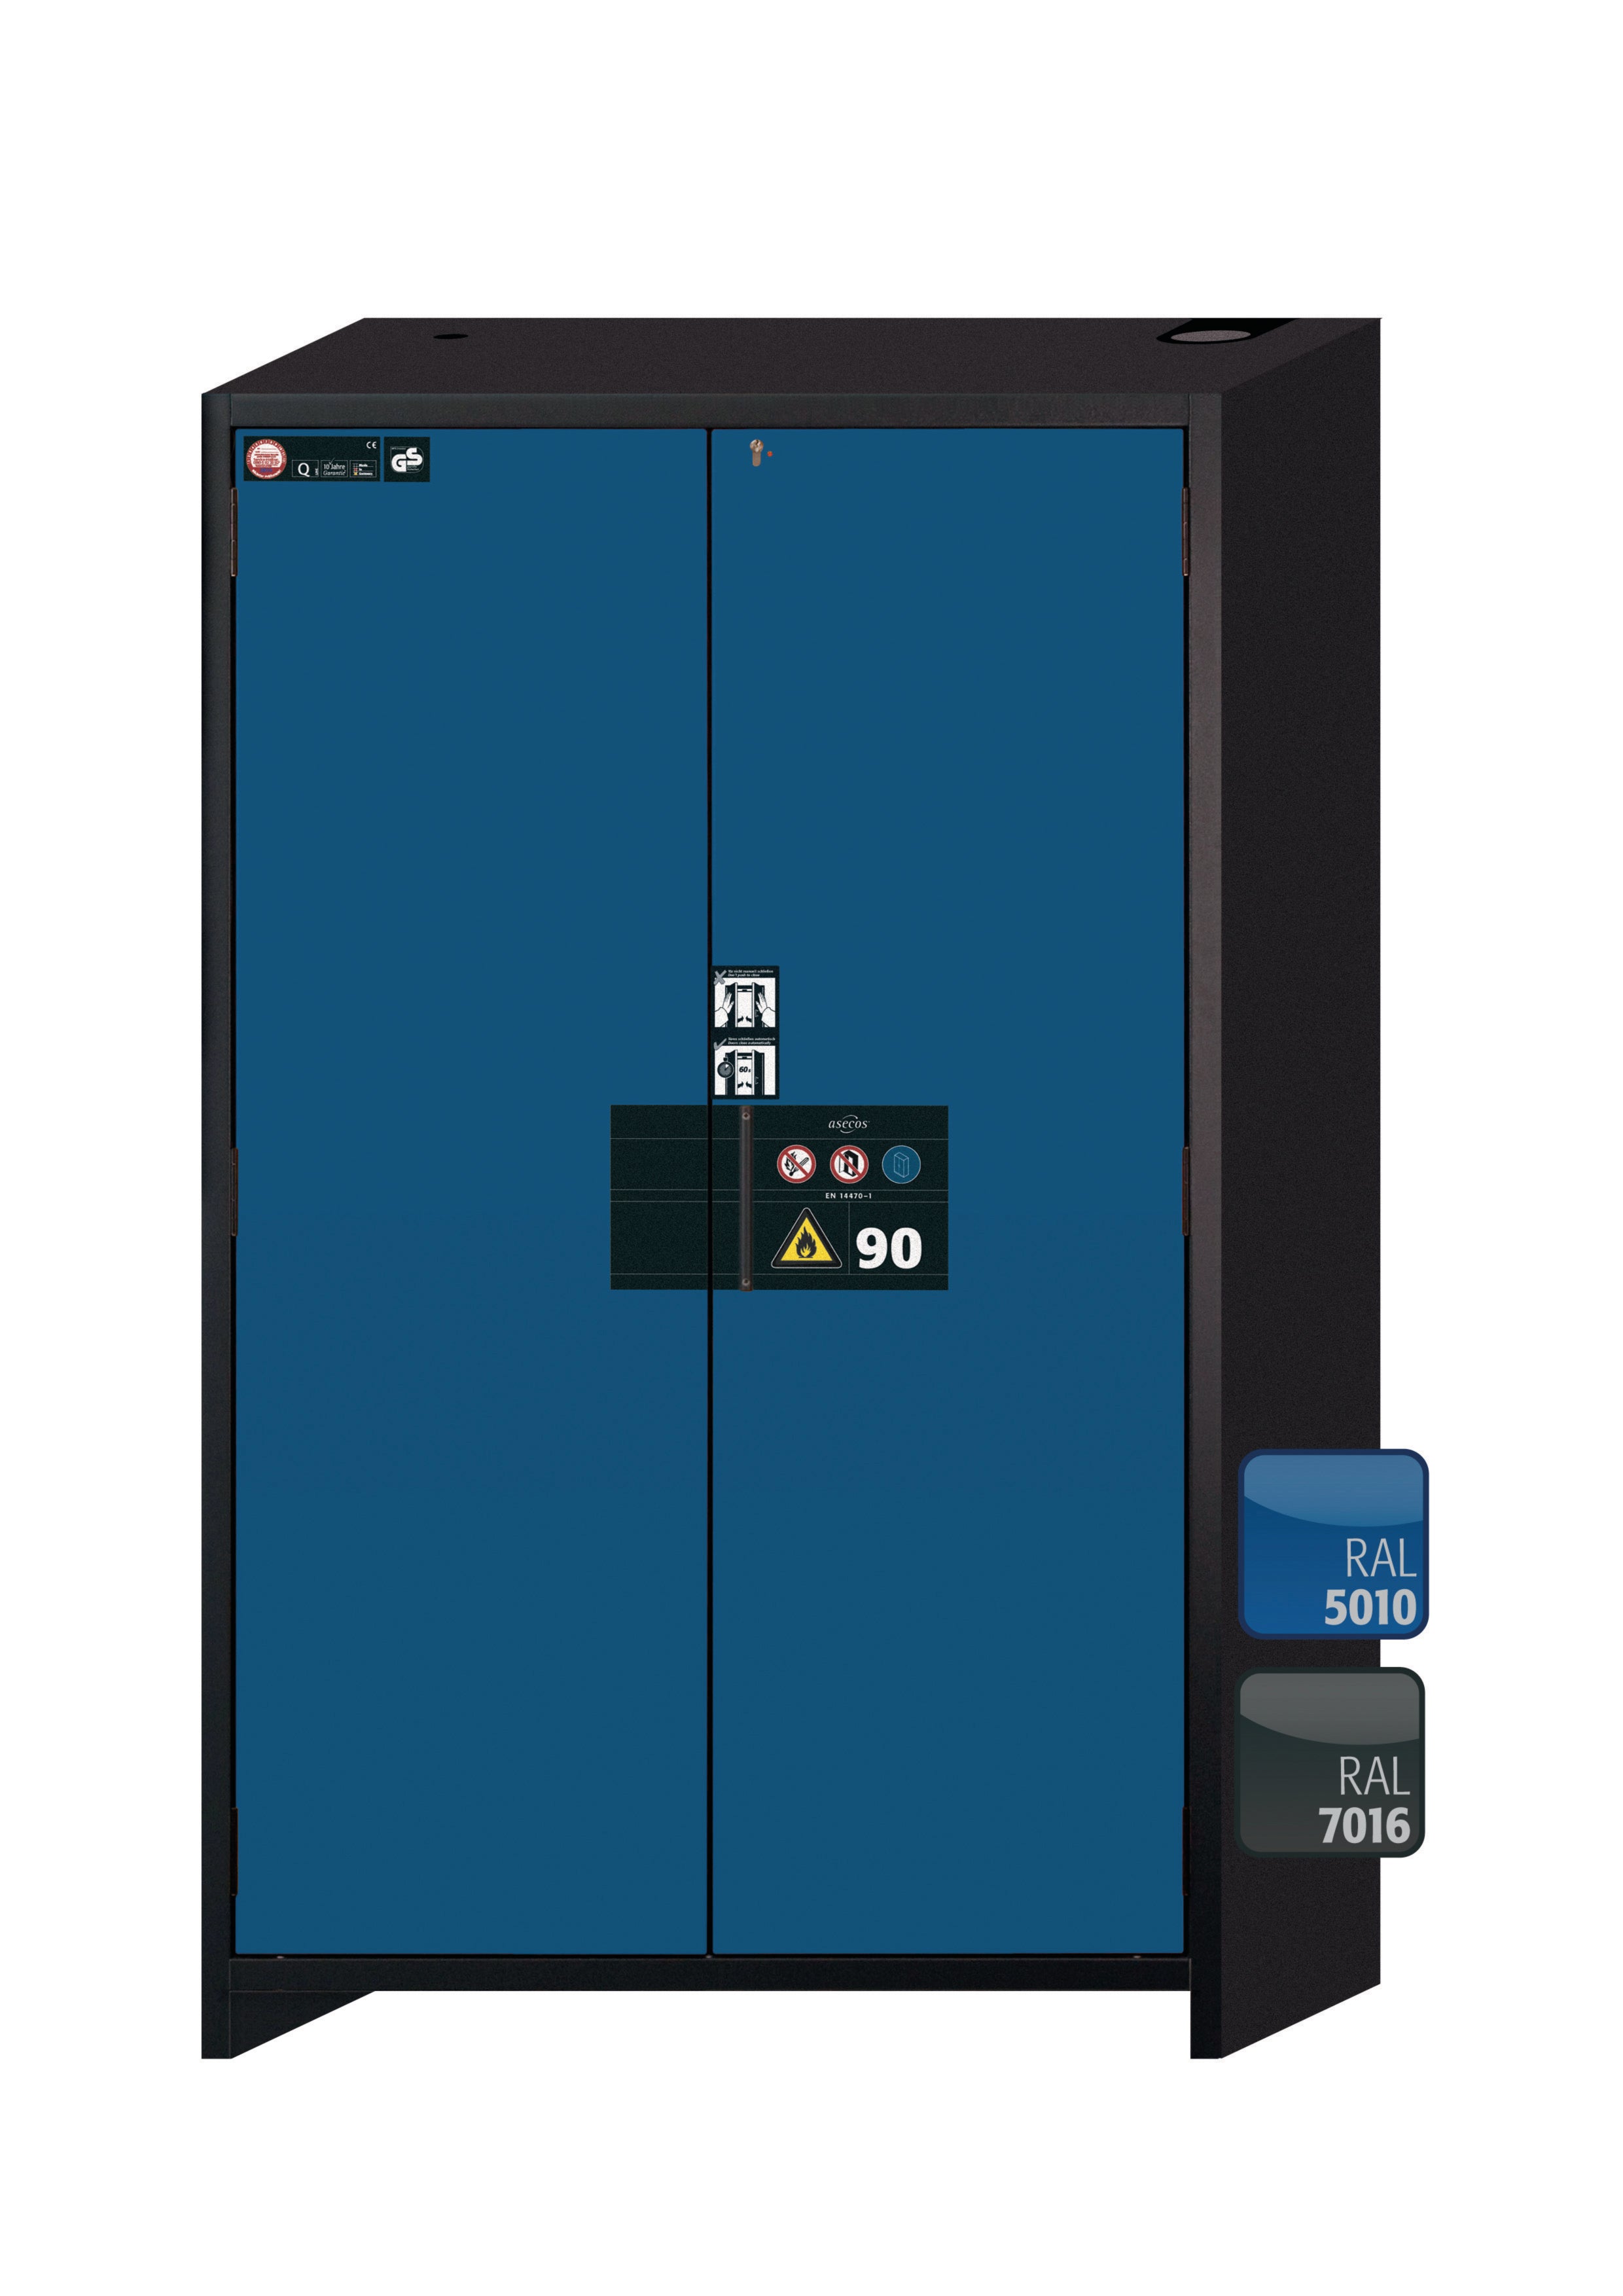 Type 90 safety storage cabinet Q-PEGASUS-90 model Q90.195.120.WDAC in gentian blue RAL 5010 with 2x drawer (standard) (sheet steel),